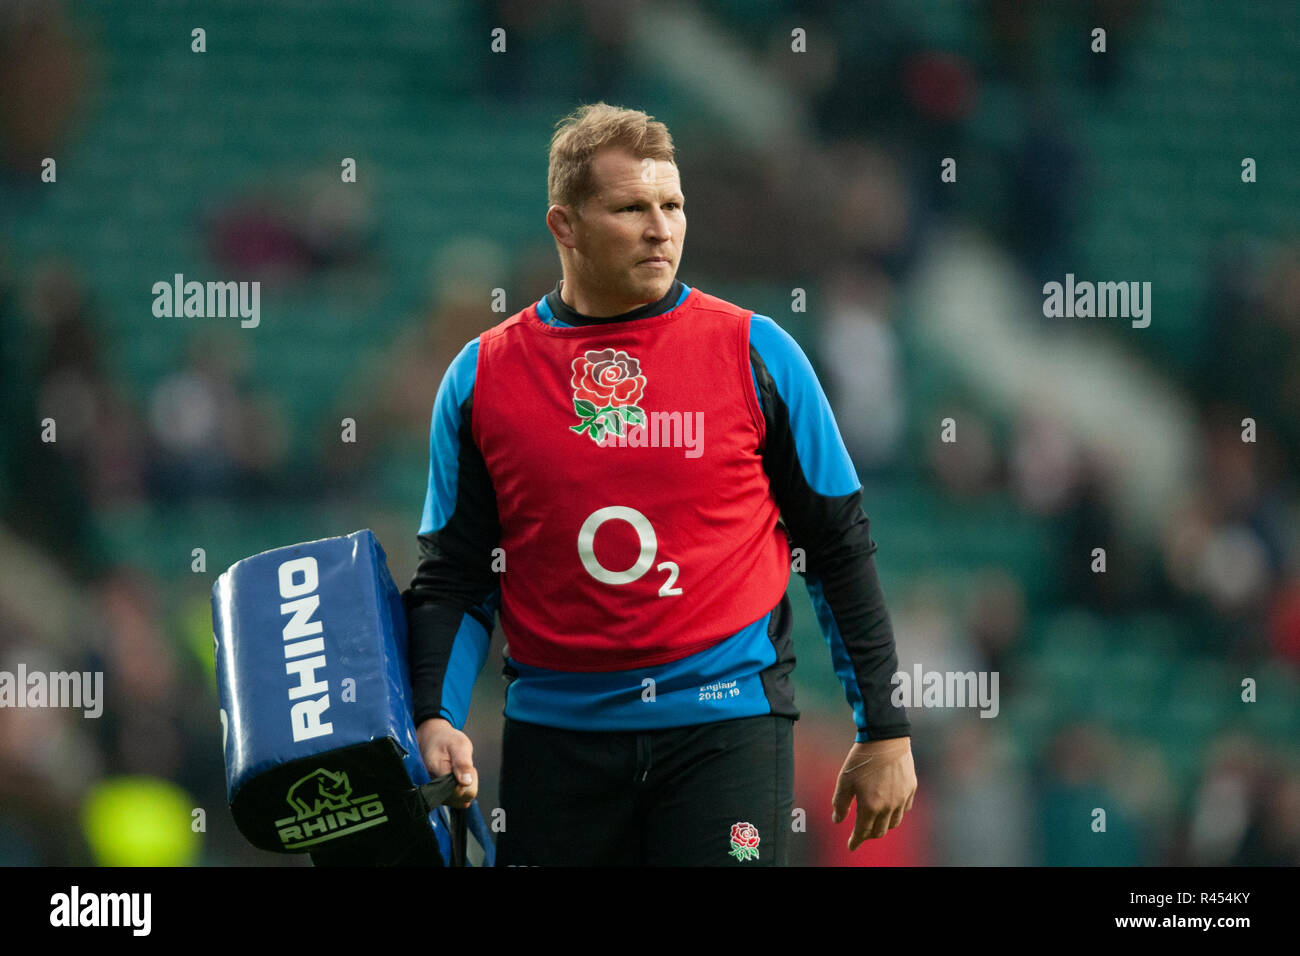 Twickenham, UK. 24th November 2018. England's Dylan Hartley warms up ahead of the Quilter International Rugby match between England and Australia. Andrew Taylor/Alamy Live News Stock Photo